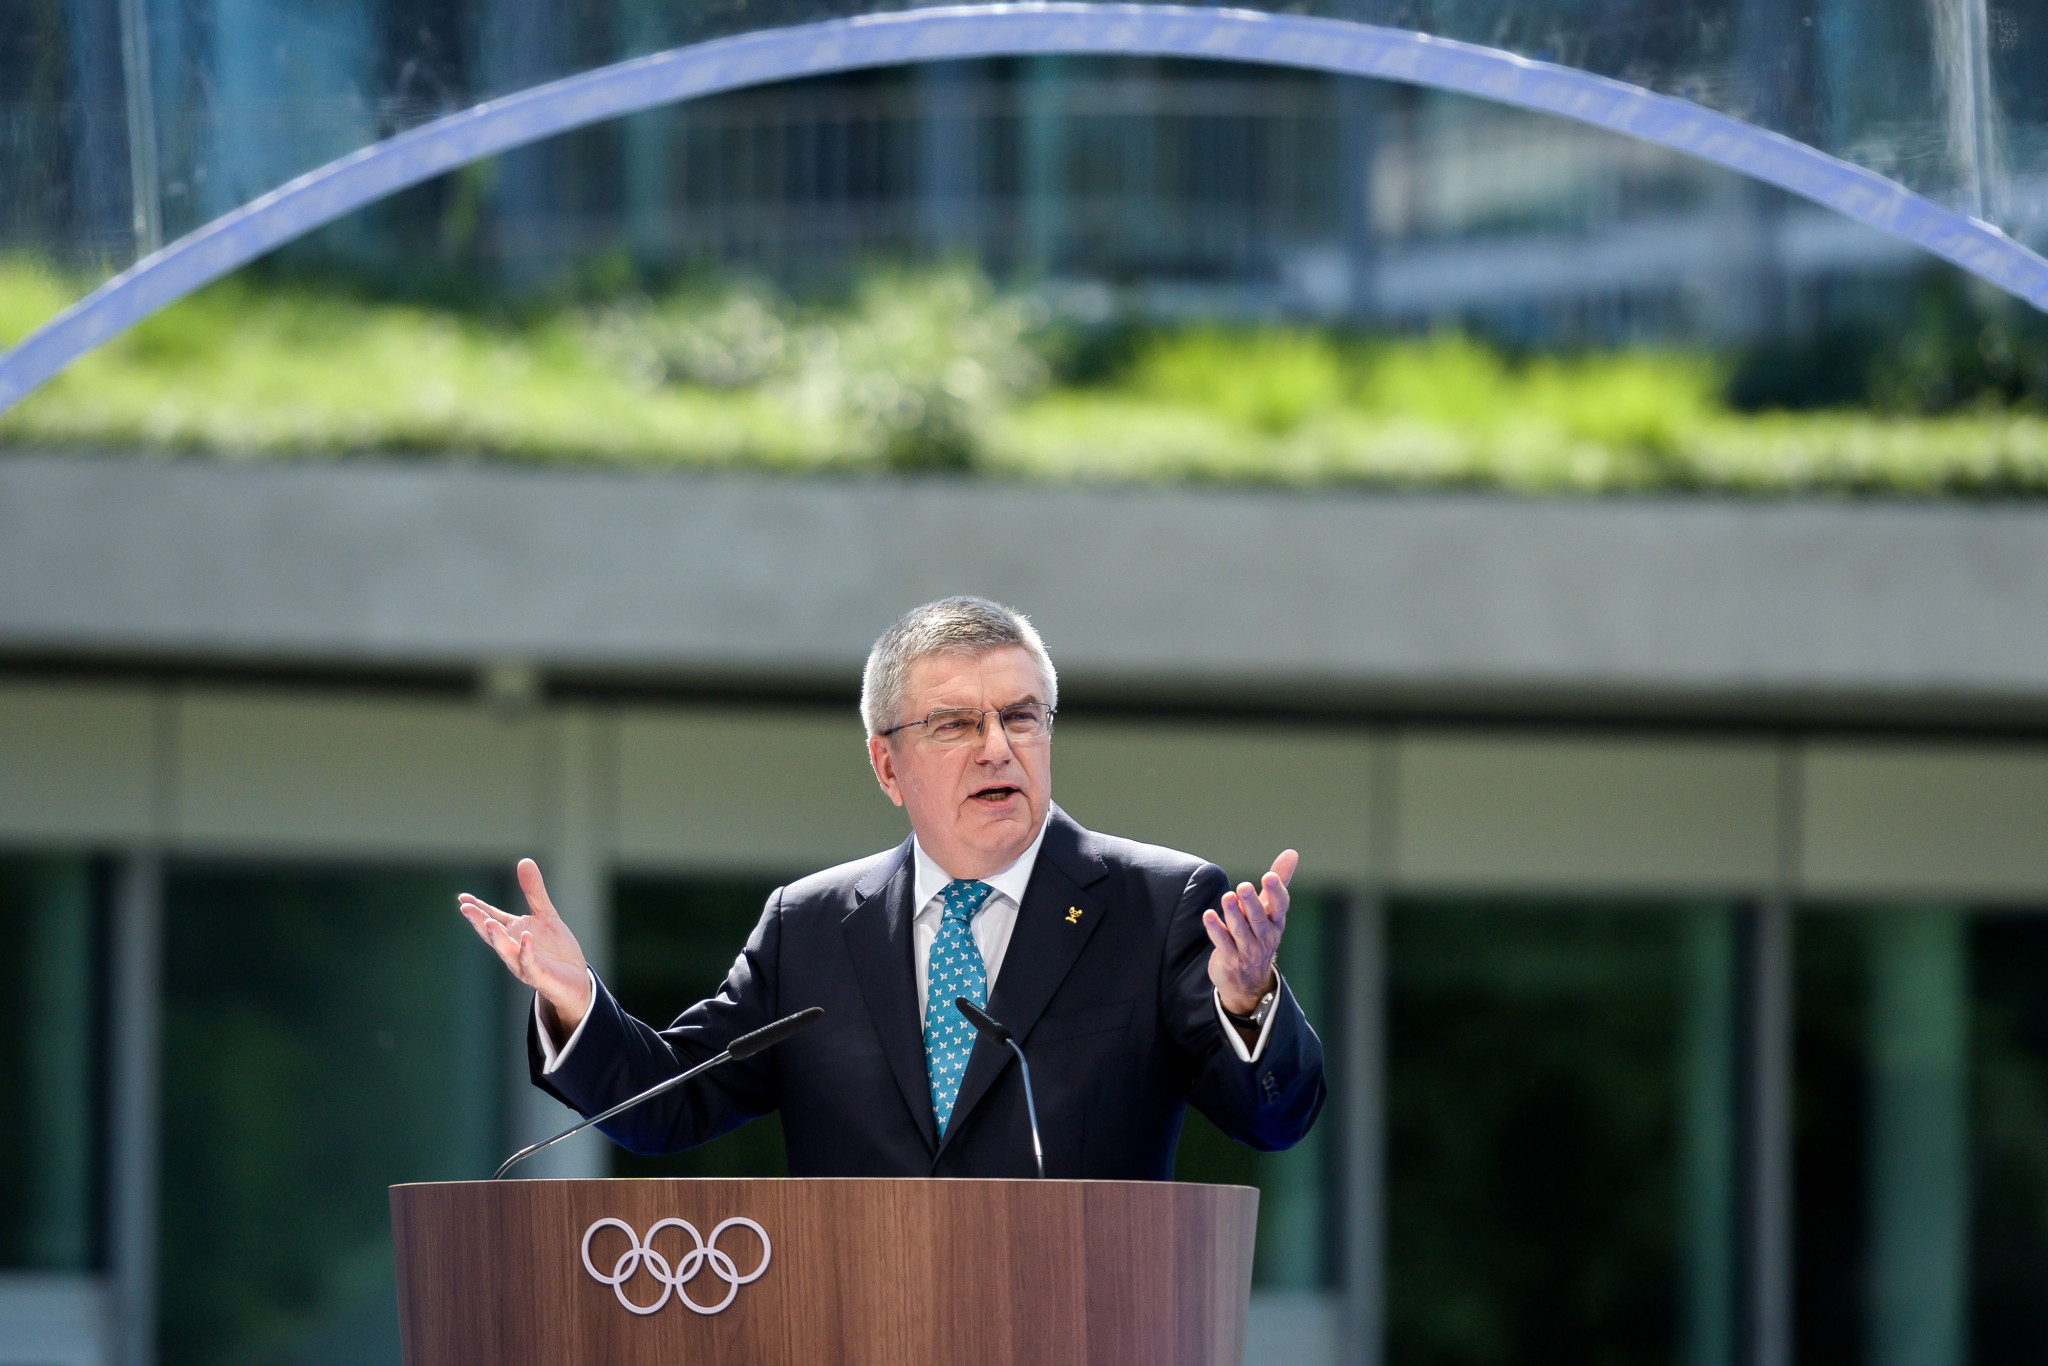 IOC President Thomas Bach welcomed attendees 